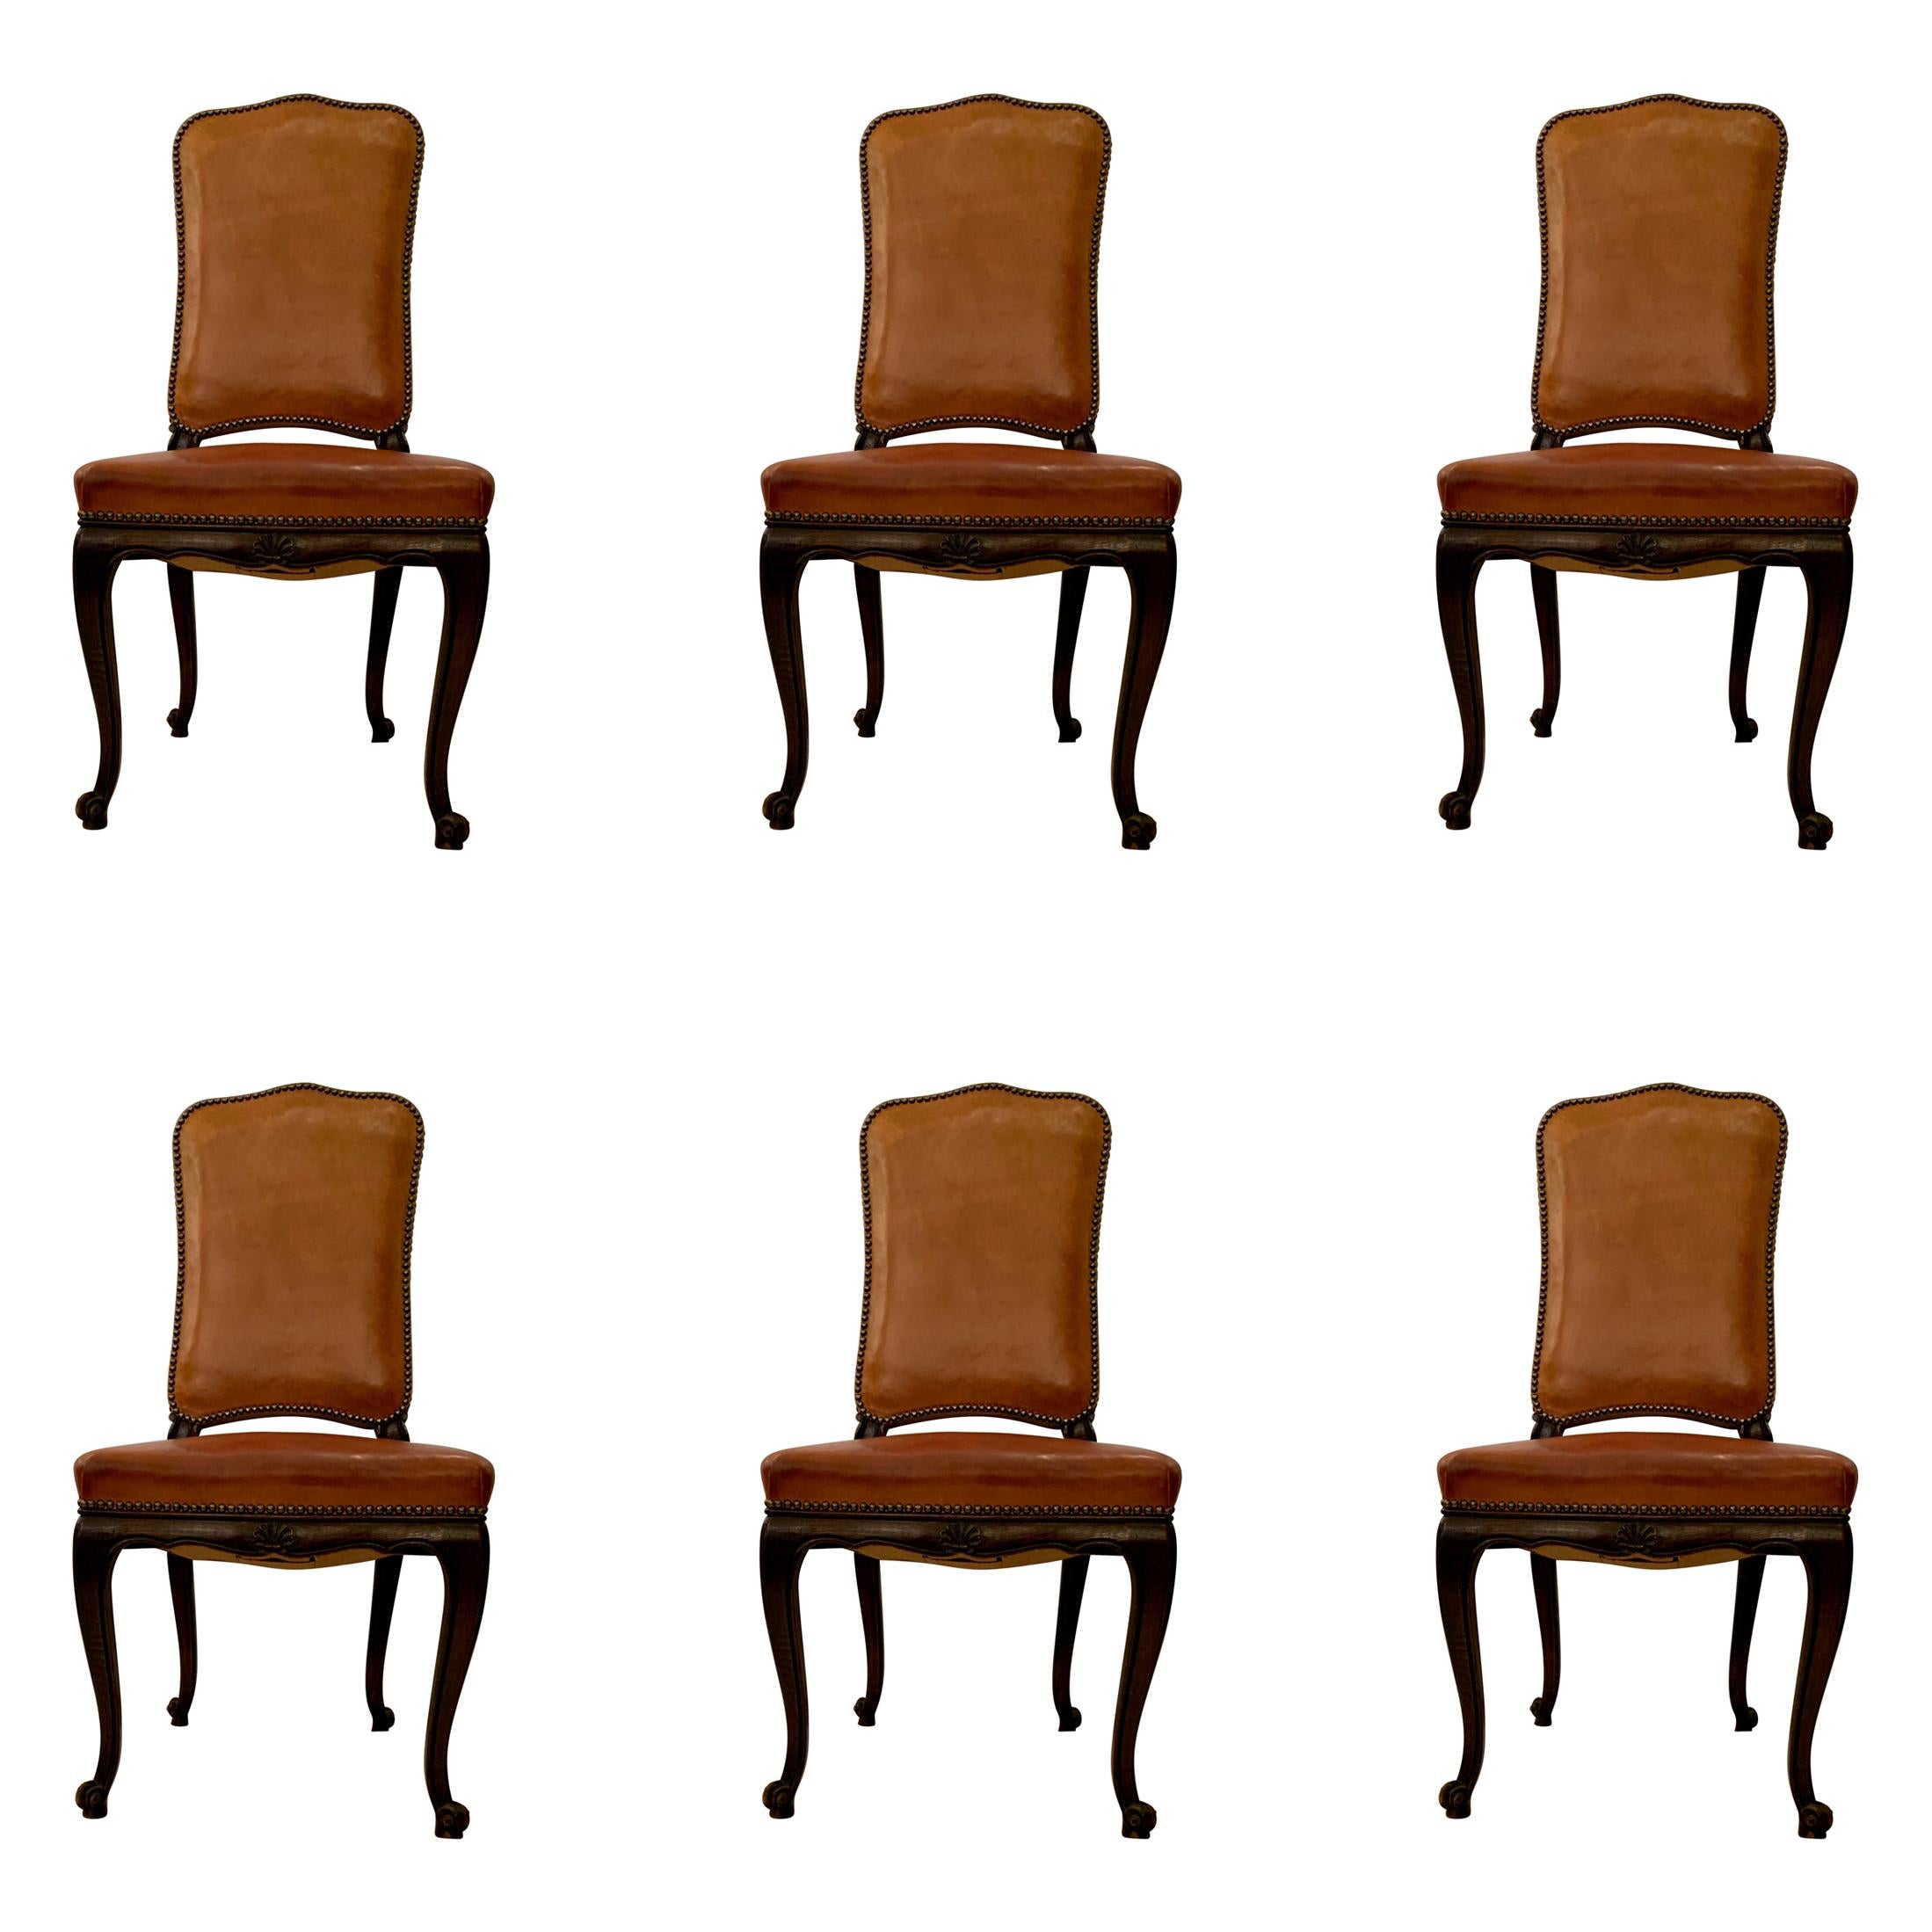 Set of 6 Antique Leather Dining Chairs with Grommets, Circa 1890-1910